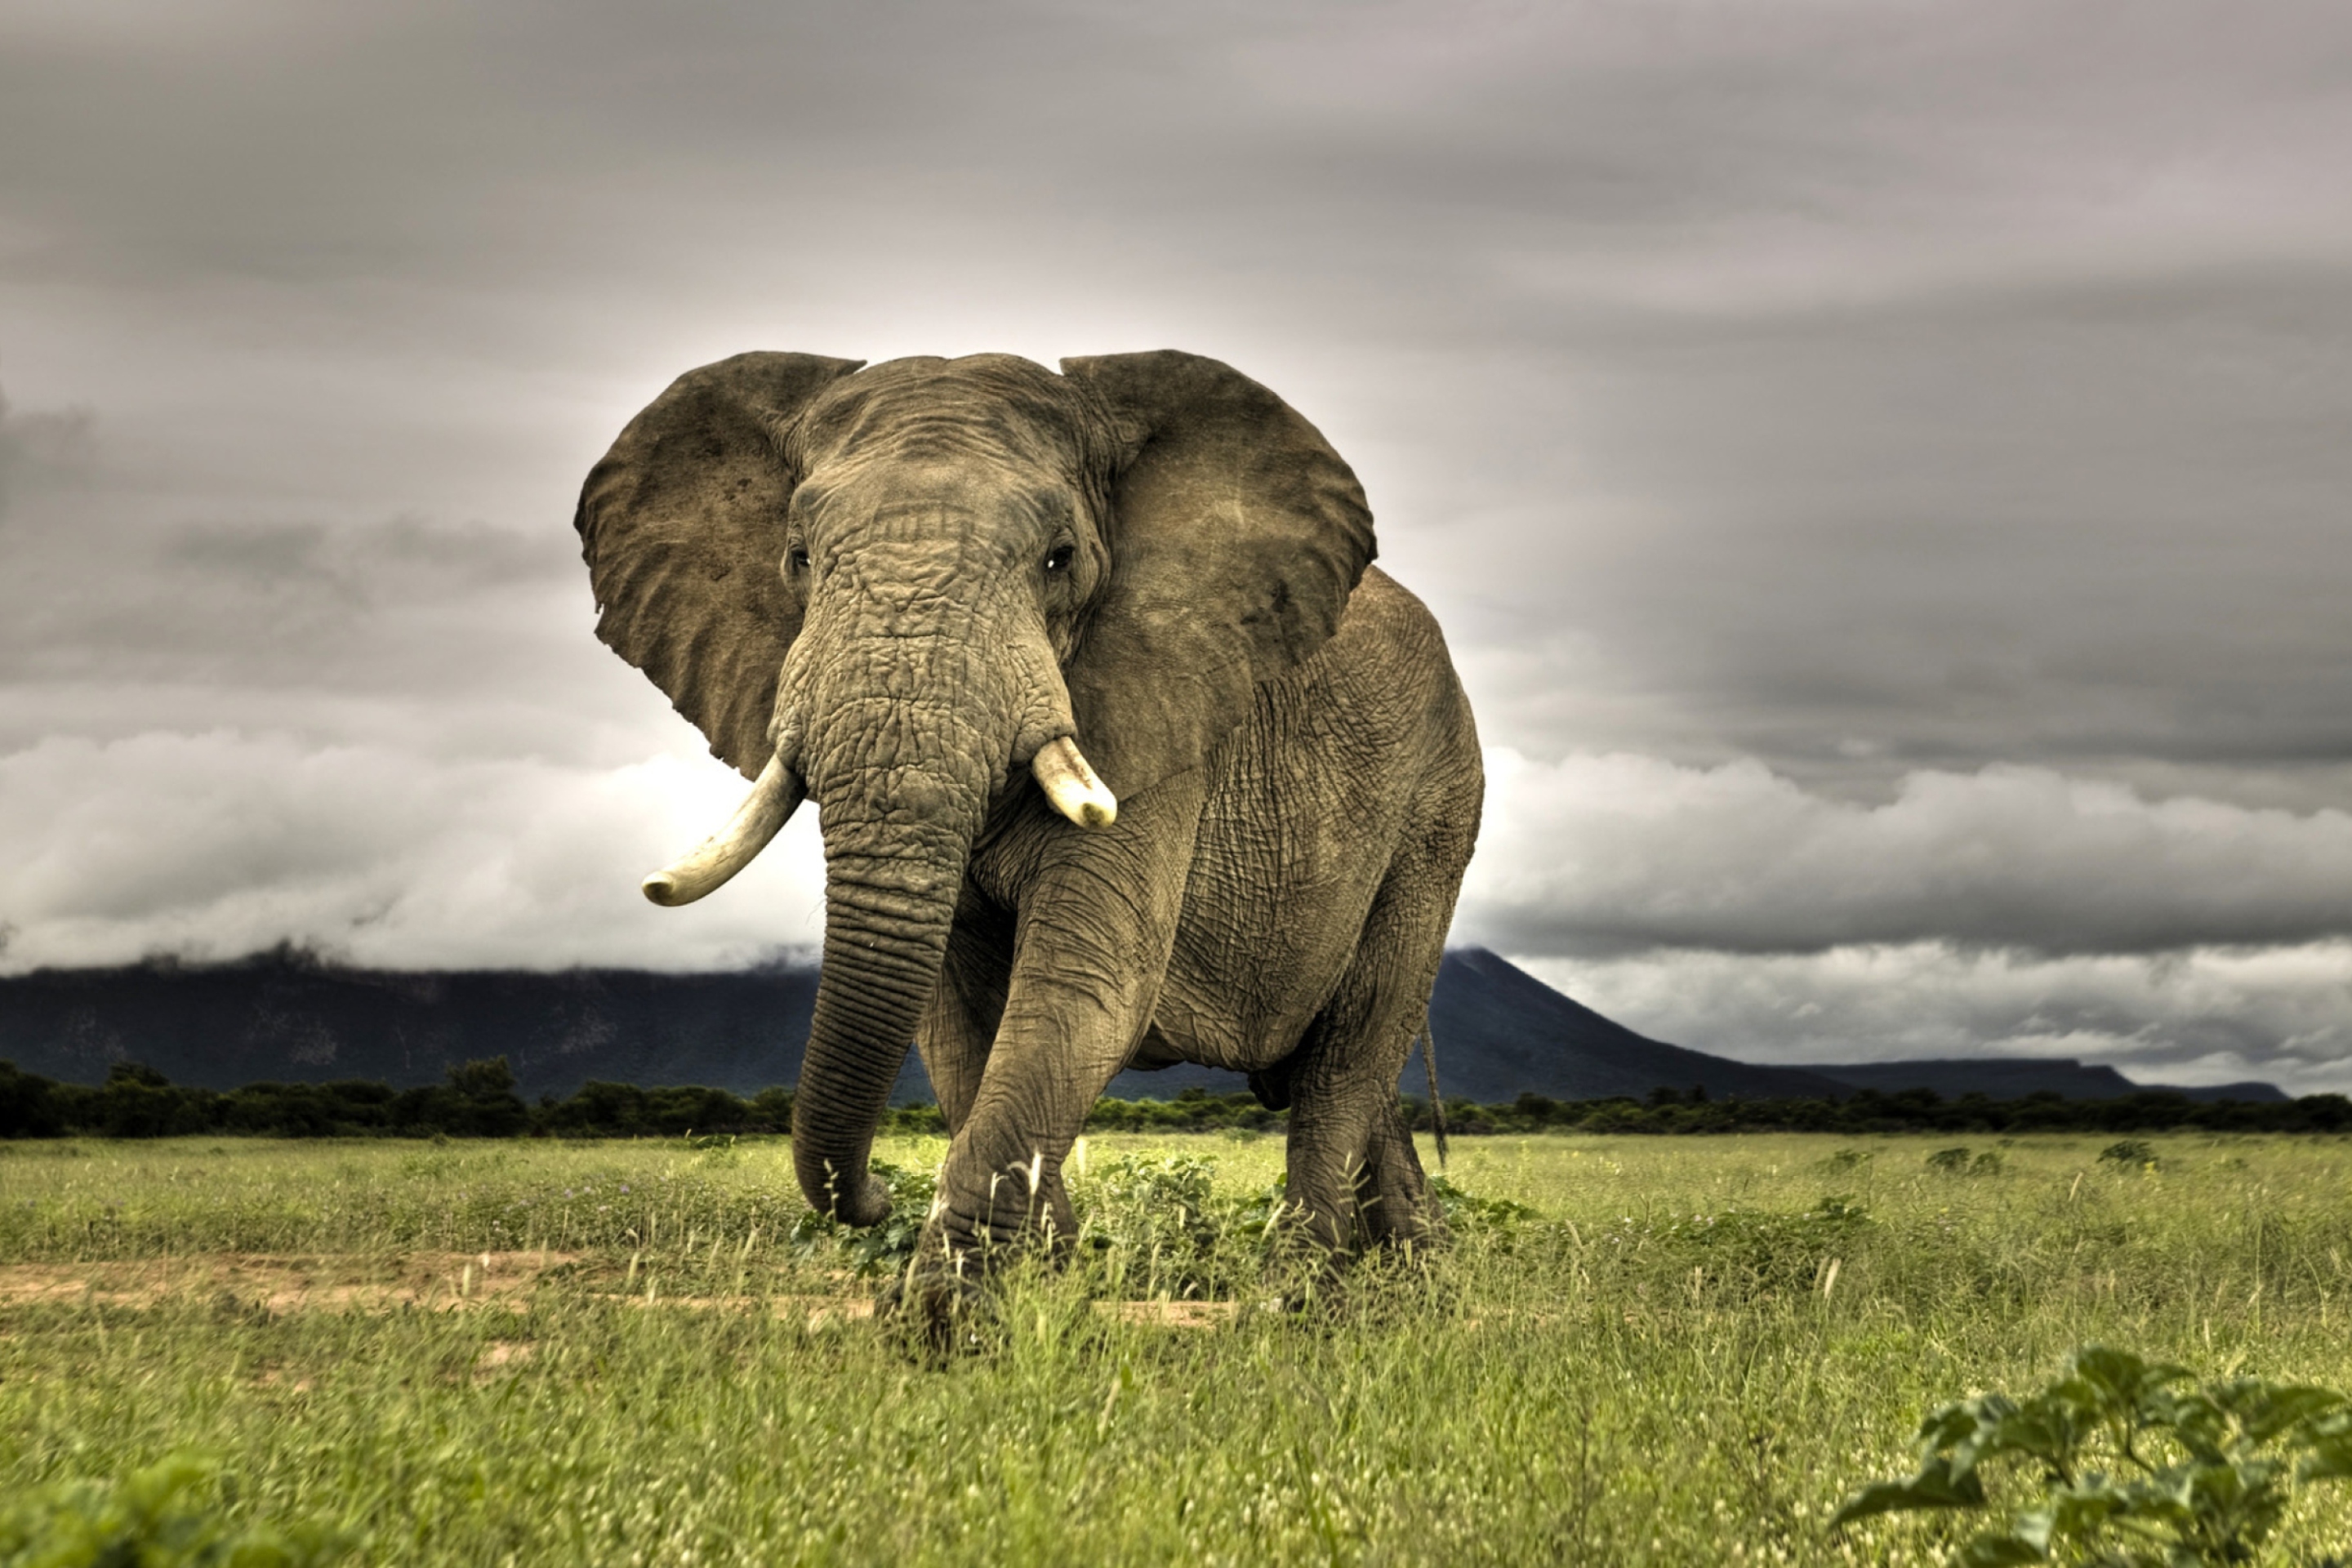 Elephant In National Park South Africa wallpaper 2880x1920